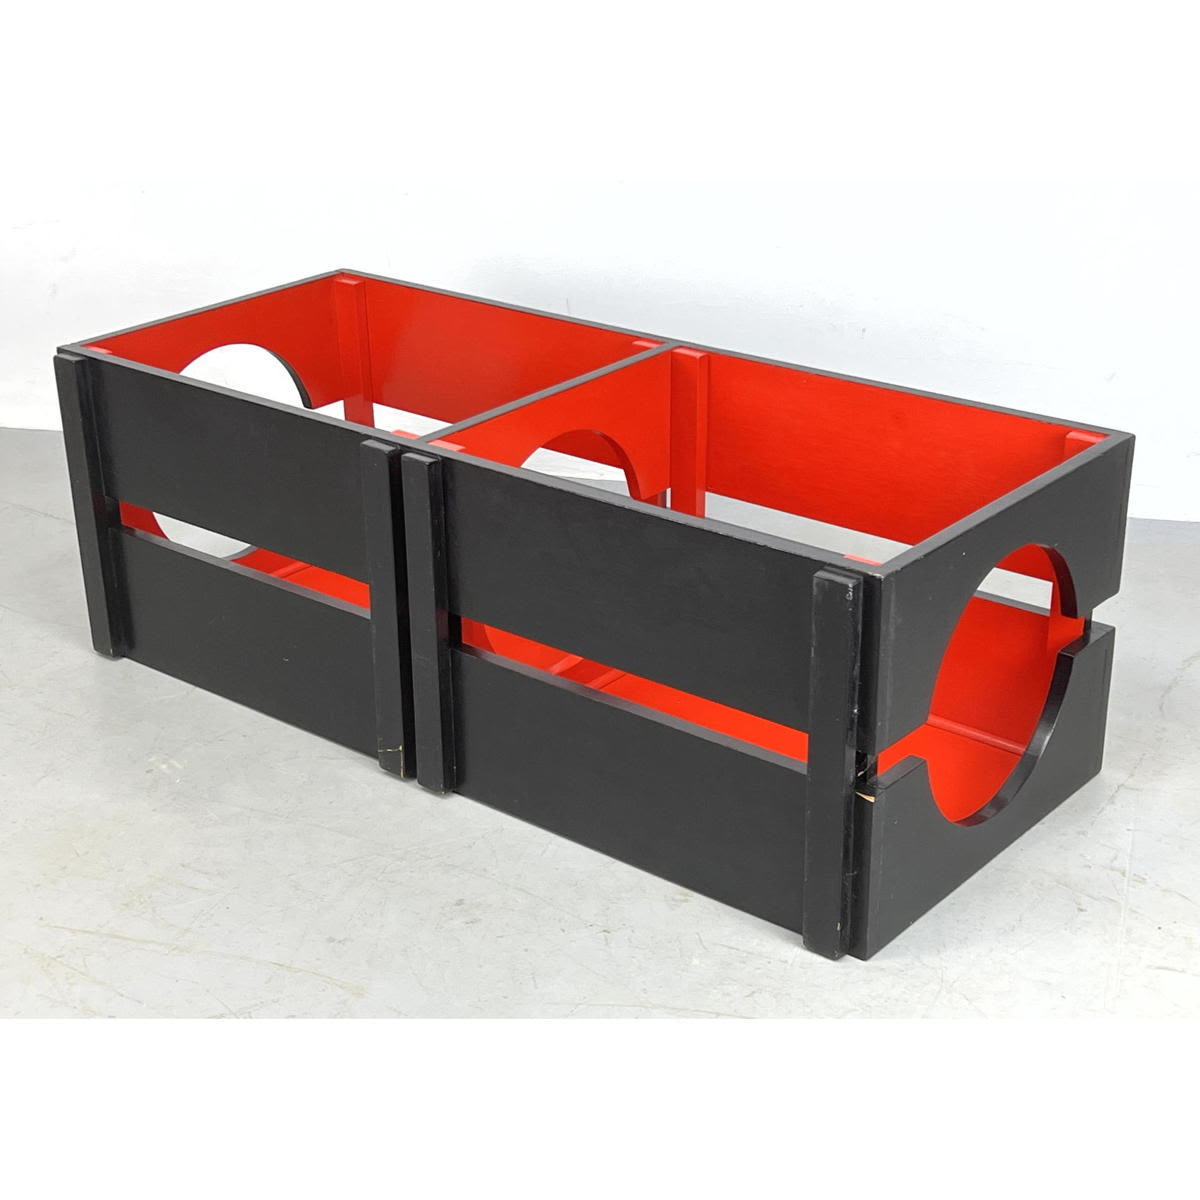 DDE STIJL STYLE low console Red 3acbfa